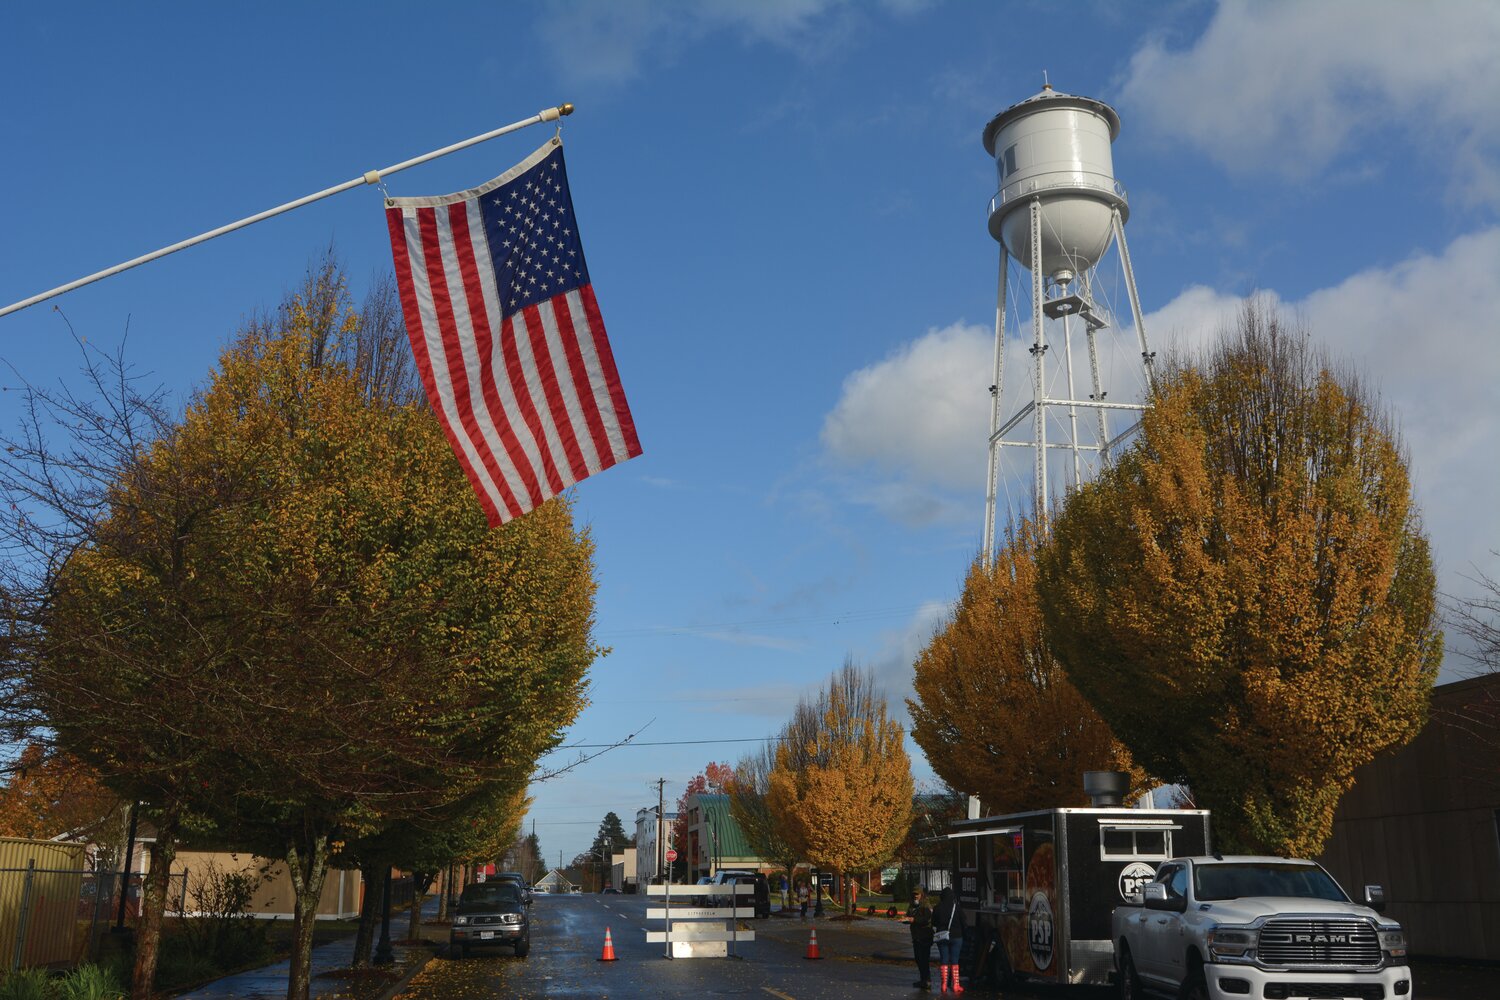 The American Flag and Yelm water tower are in view as attendees of the Yelm Veterans Day concert order pizza from Puget Sound Pizza on Nov. 11.